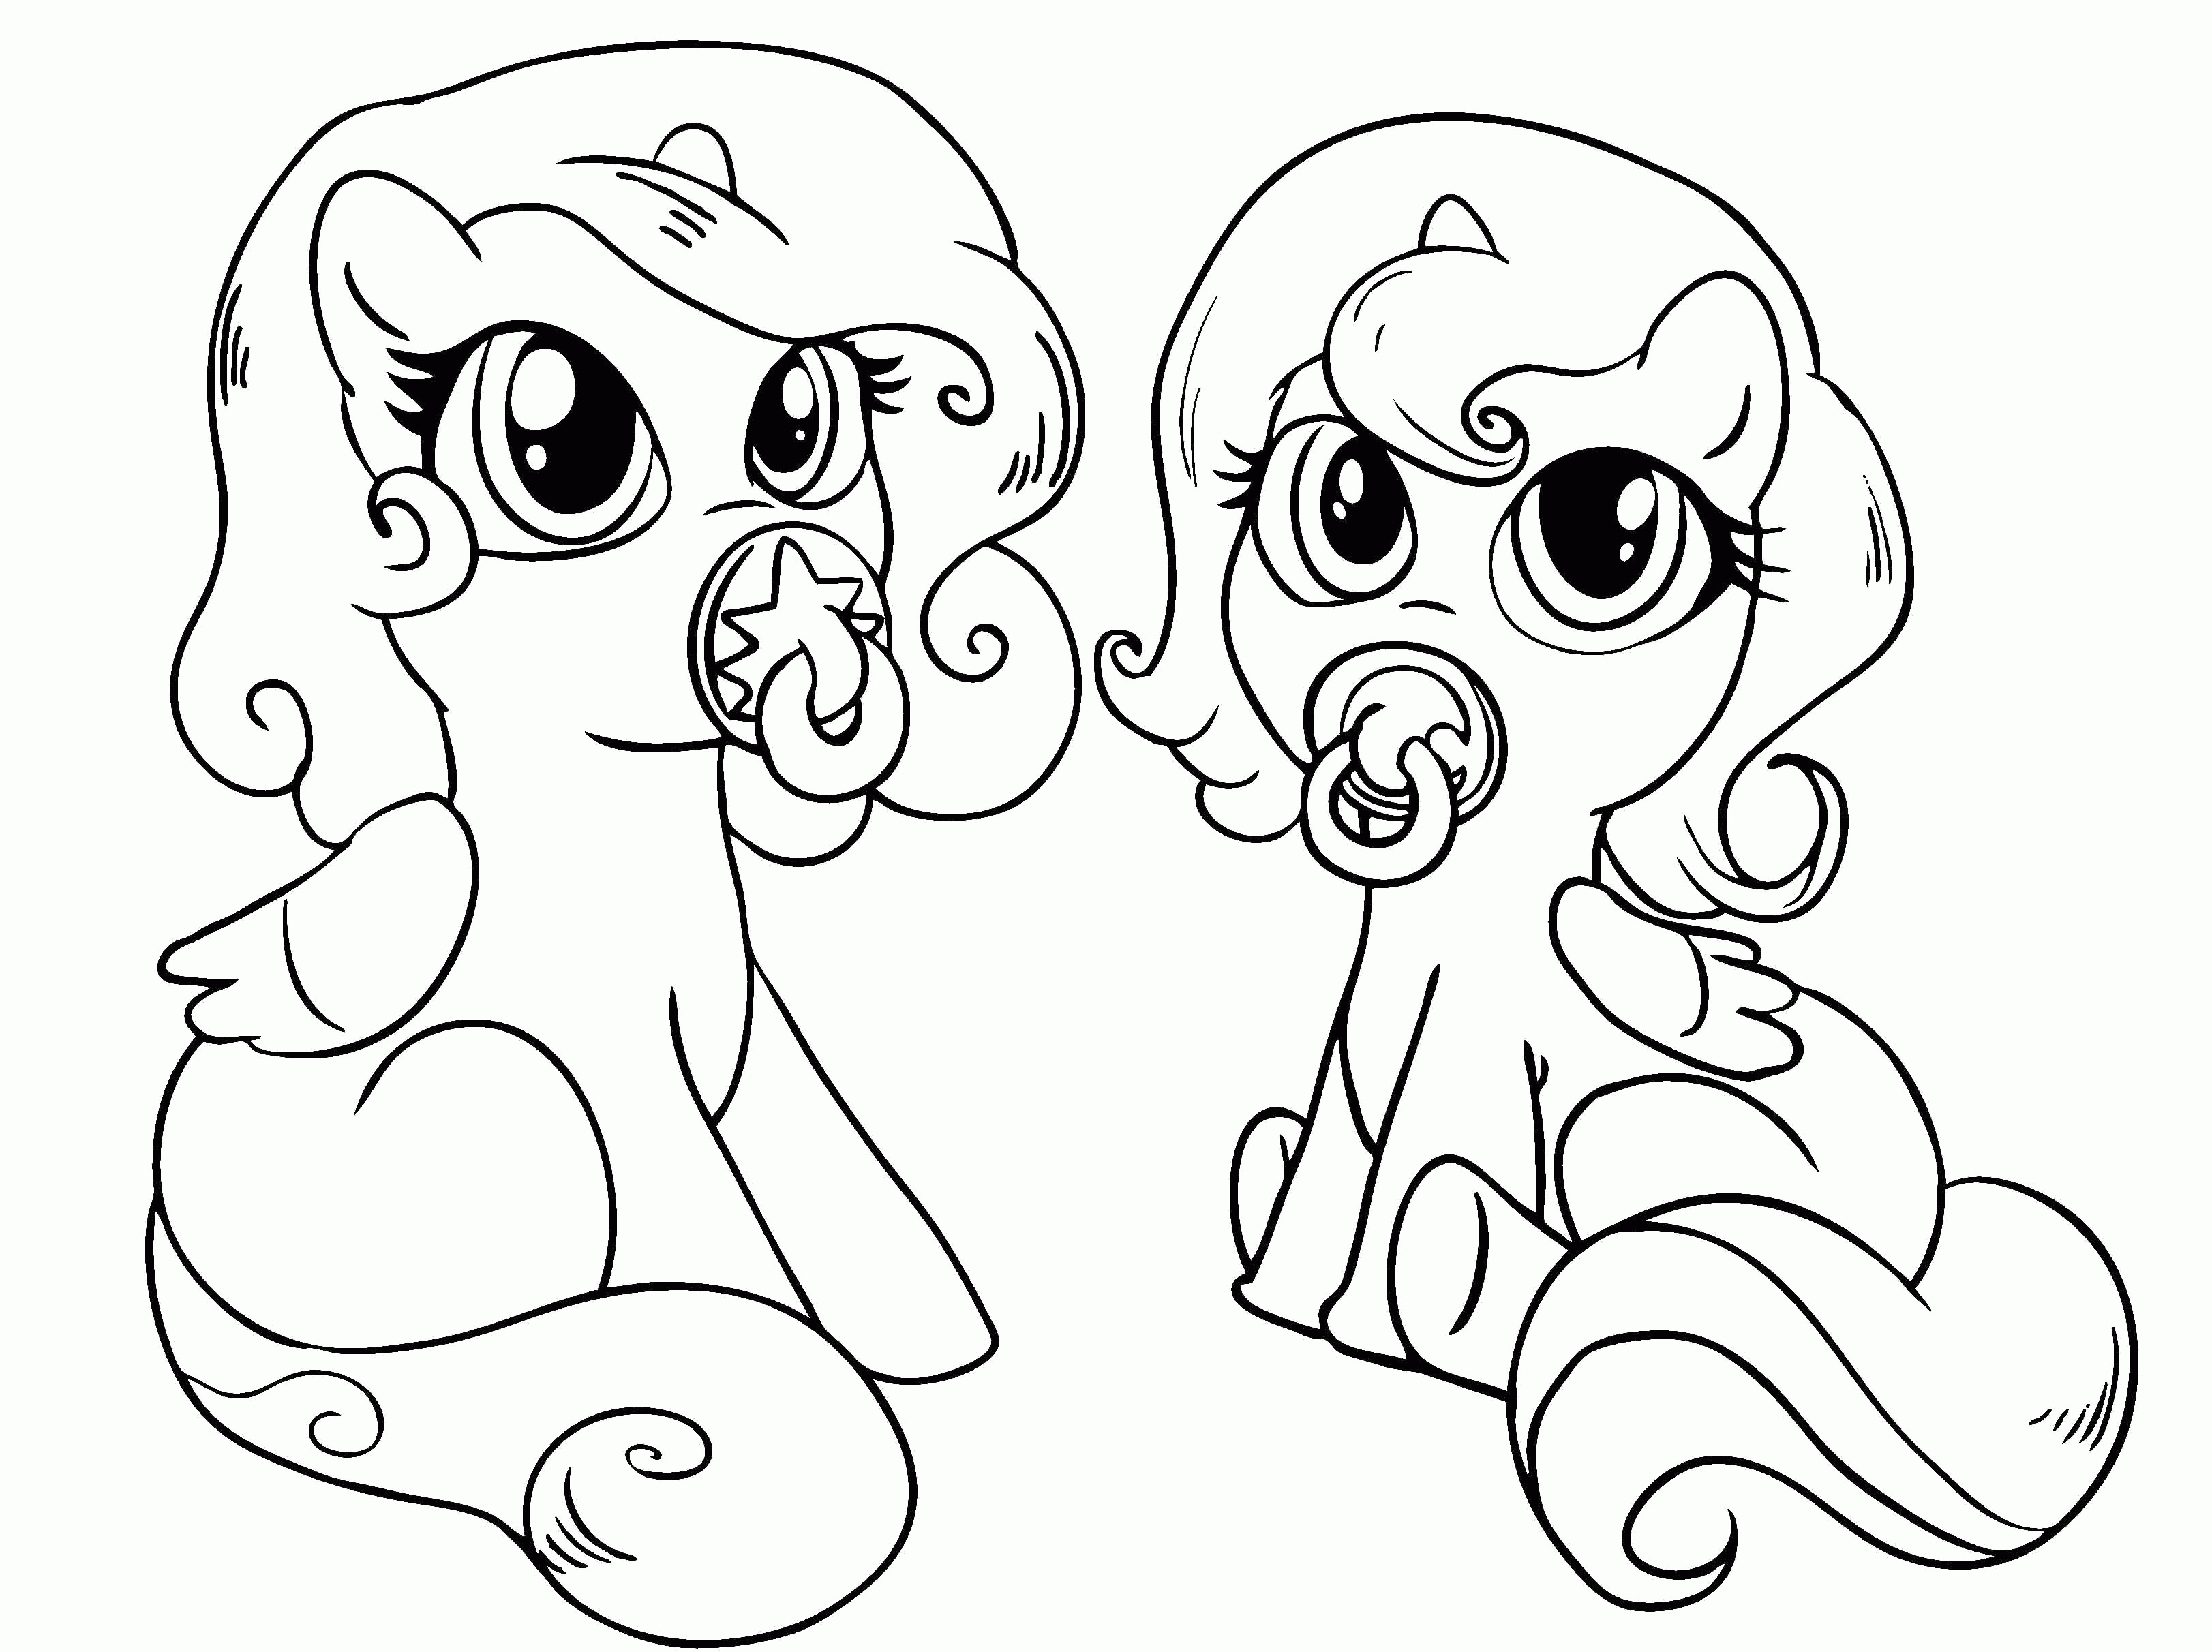 Coloring Pages With Ponies - Coloring Home